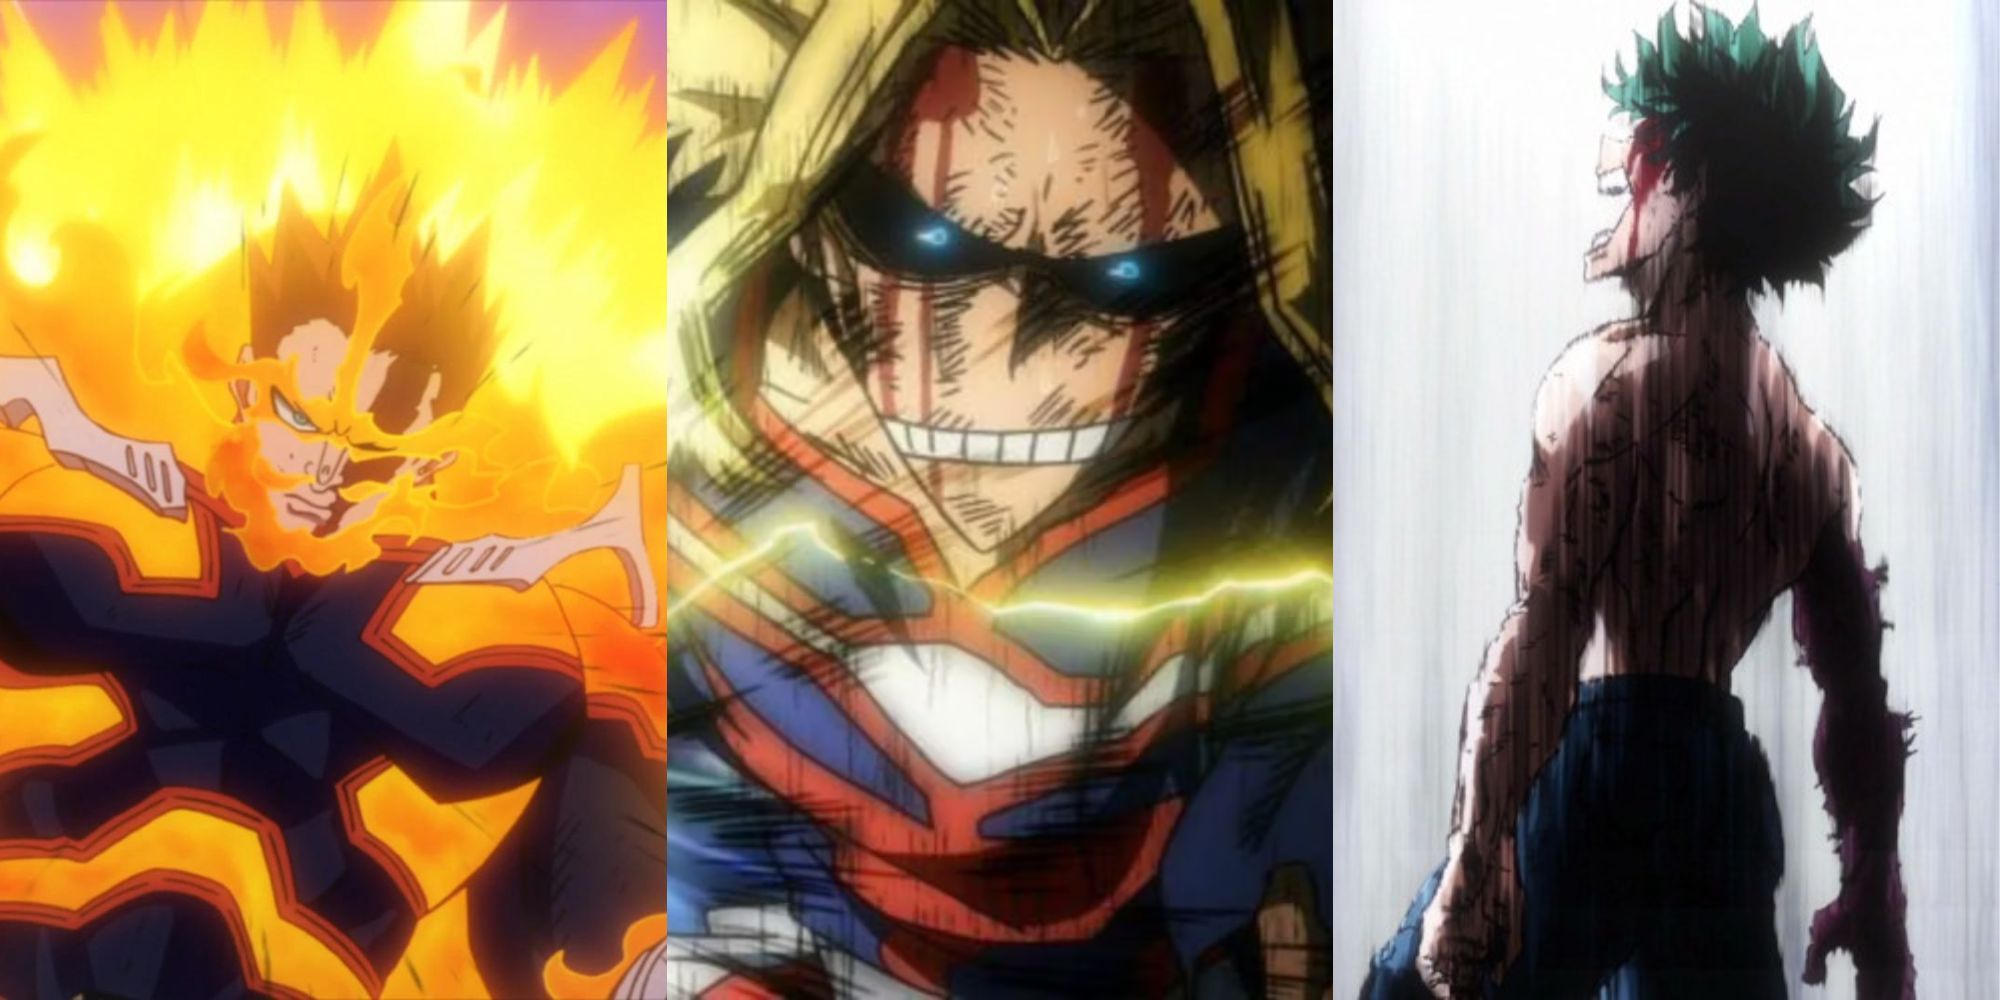 A collage of some iconic finishing moves in My Hero Academia: Endeavor's Prominence Burn, All Might's United States of Smash and Deku's Delaware Smash.